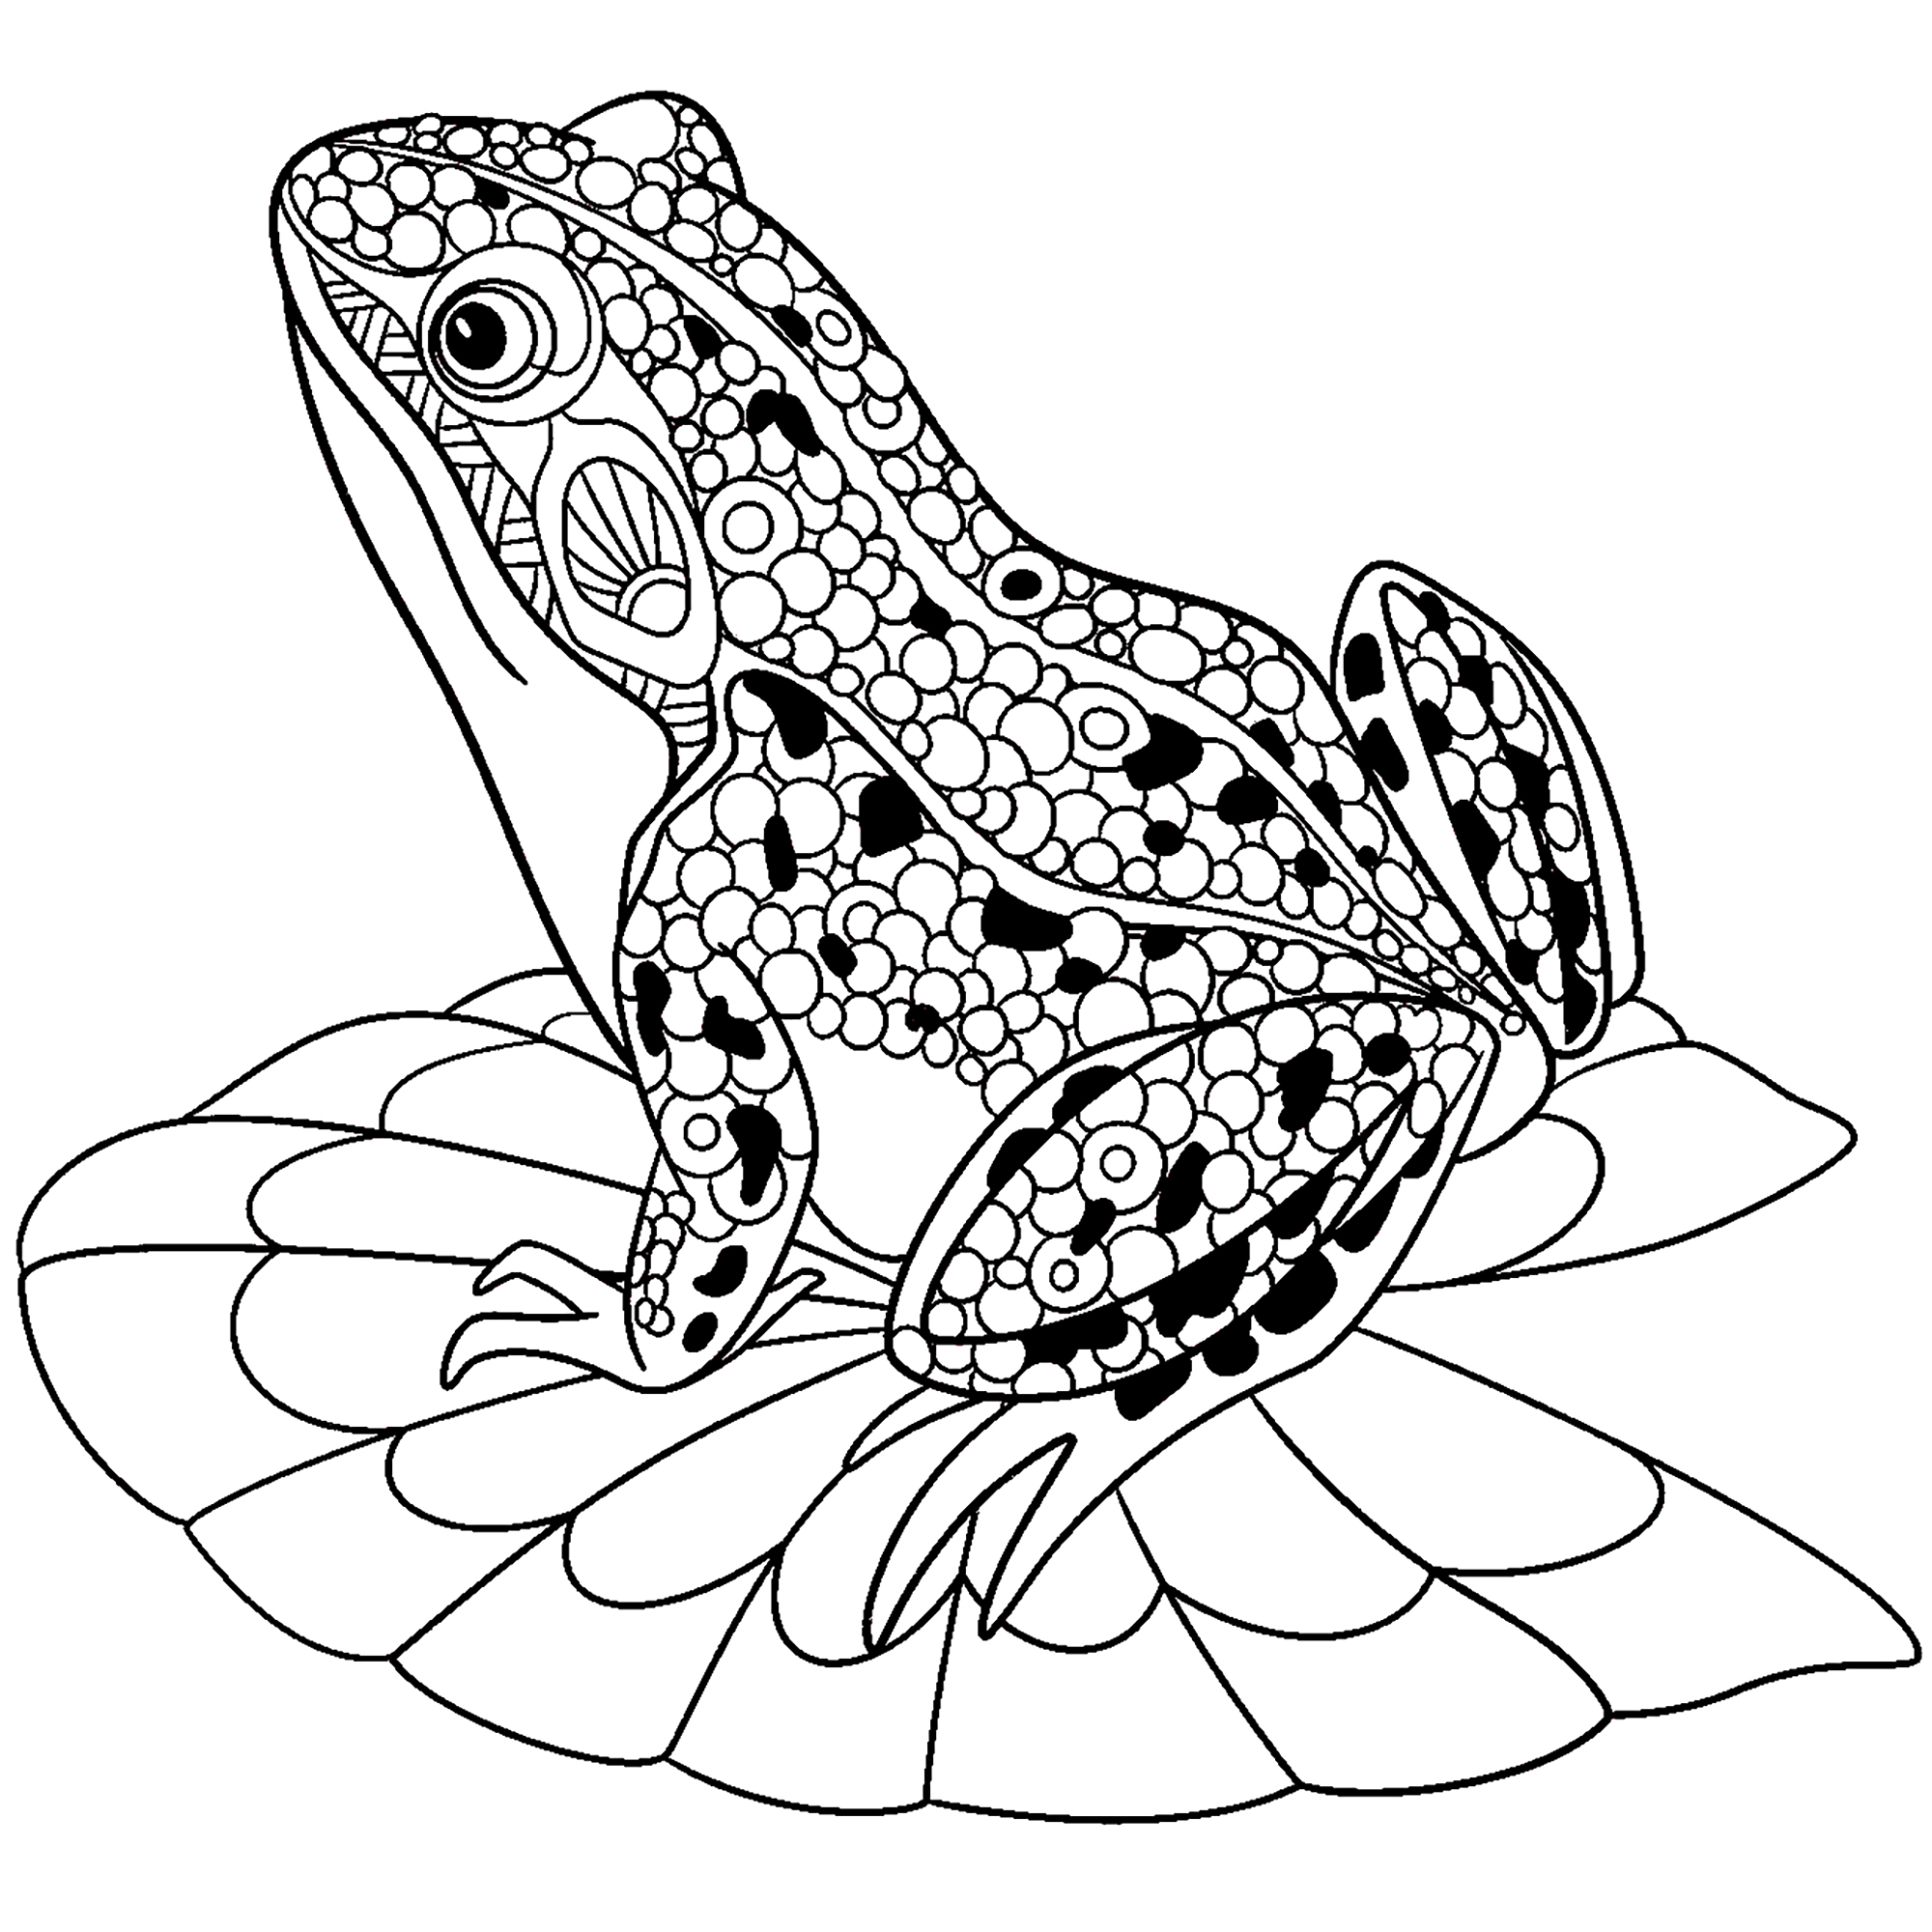 cute-frog-on-water-lily-leaf-frogs-adult-coloring-pages